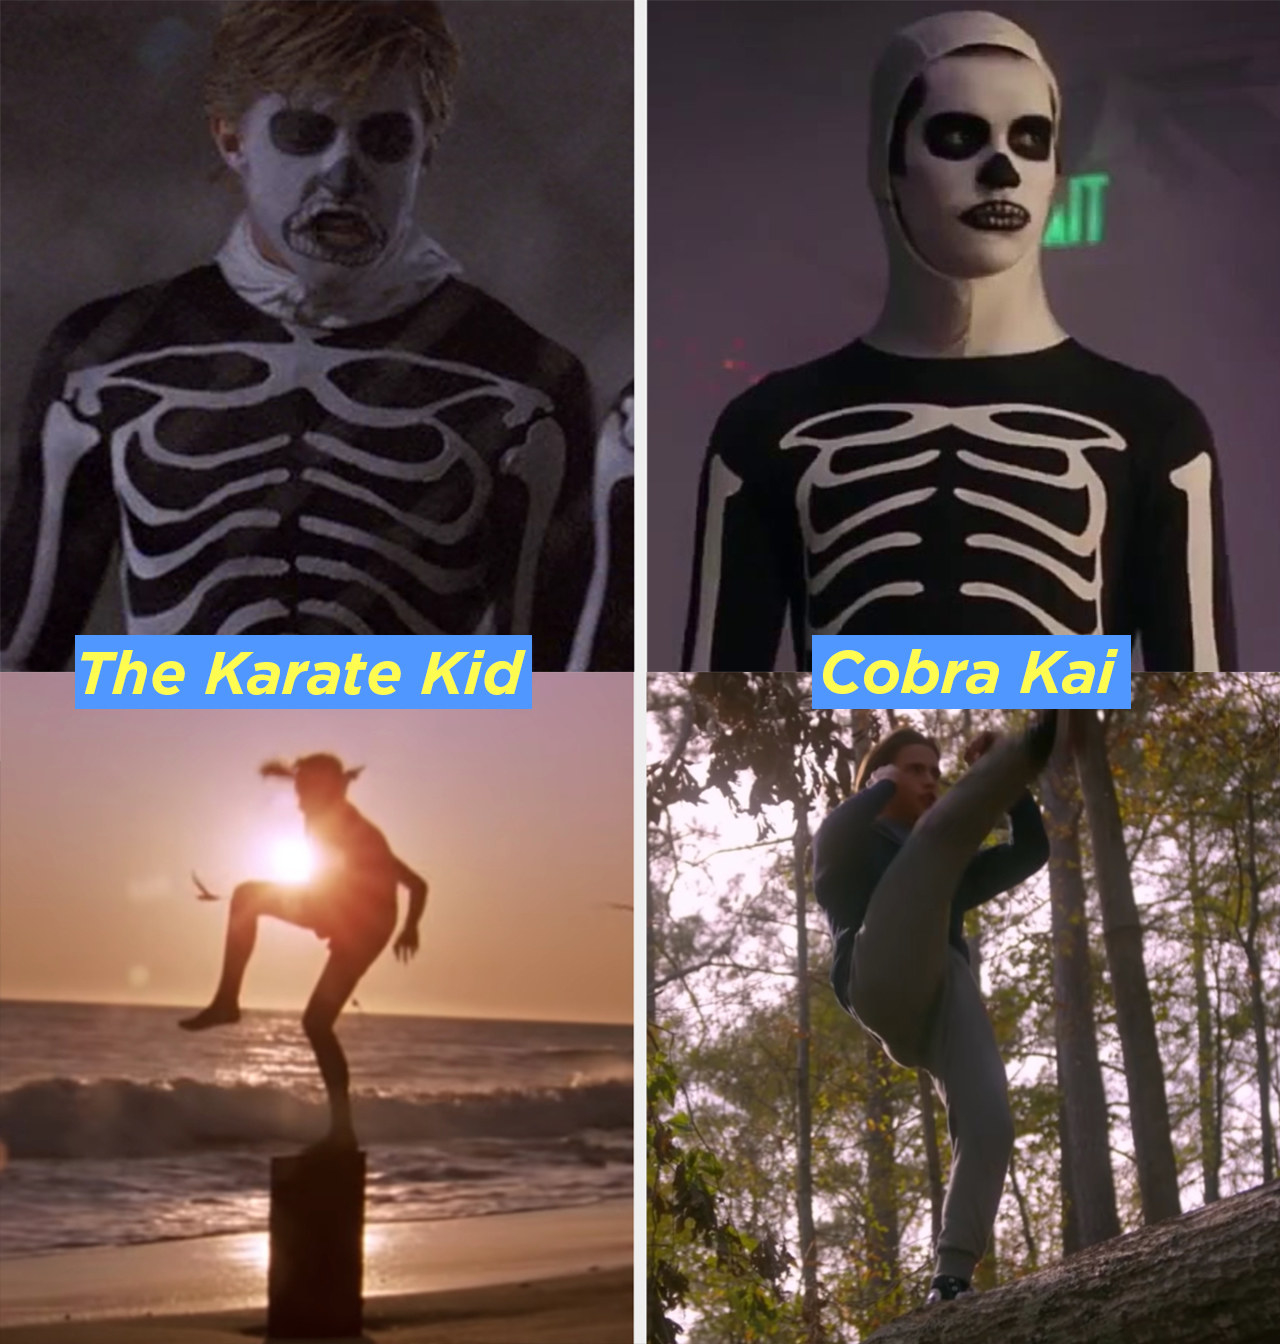 Johnny&#x27;s skeleton costume and Miguel wearing an identical costume, then young Daniel balancing on a stump and Robby balancing on a tree